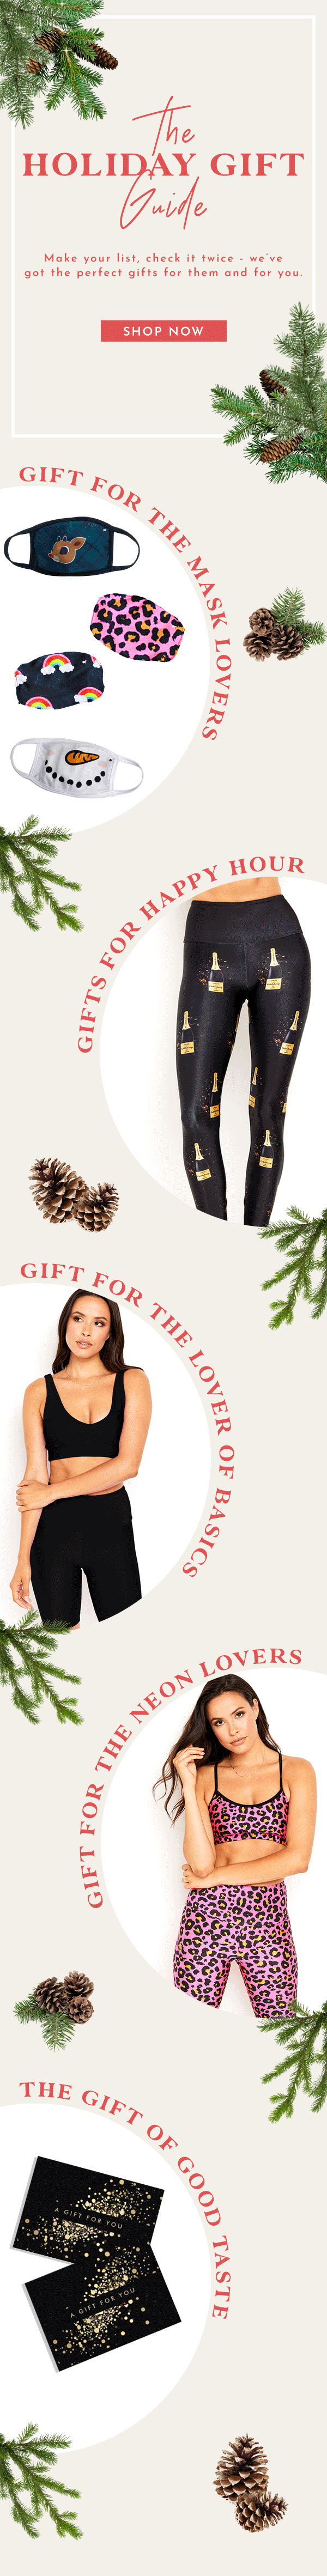 HOLIDAYGIFTGUIDE_EMAIL.gif